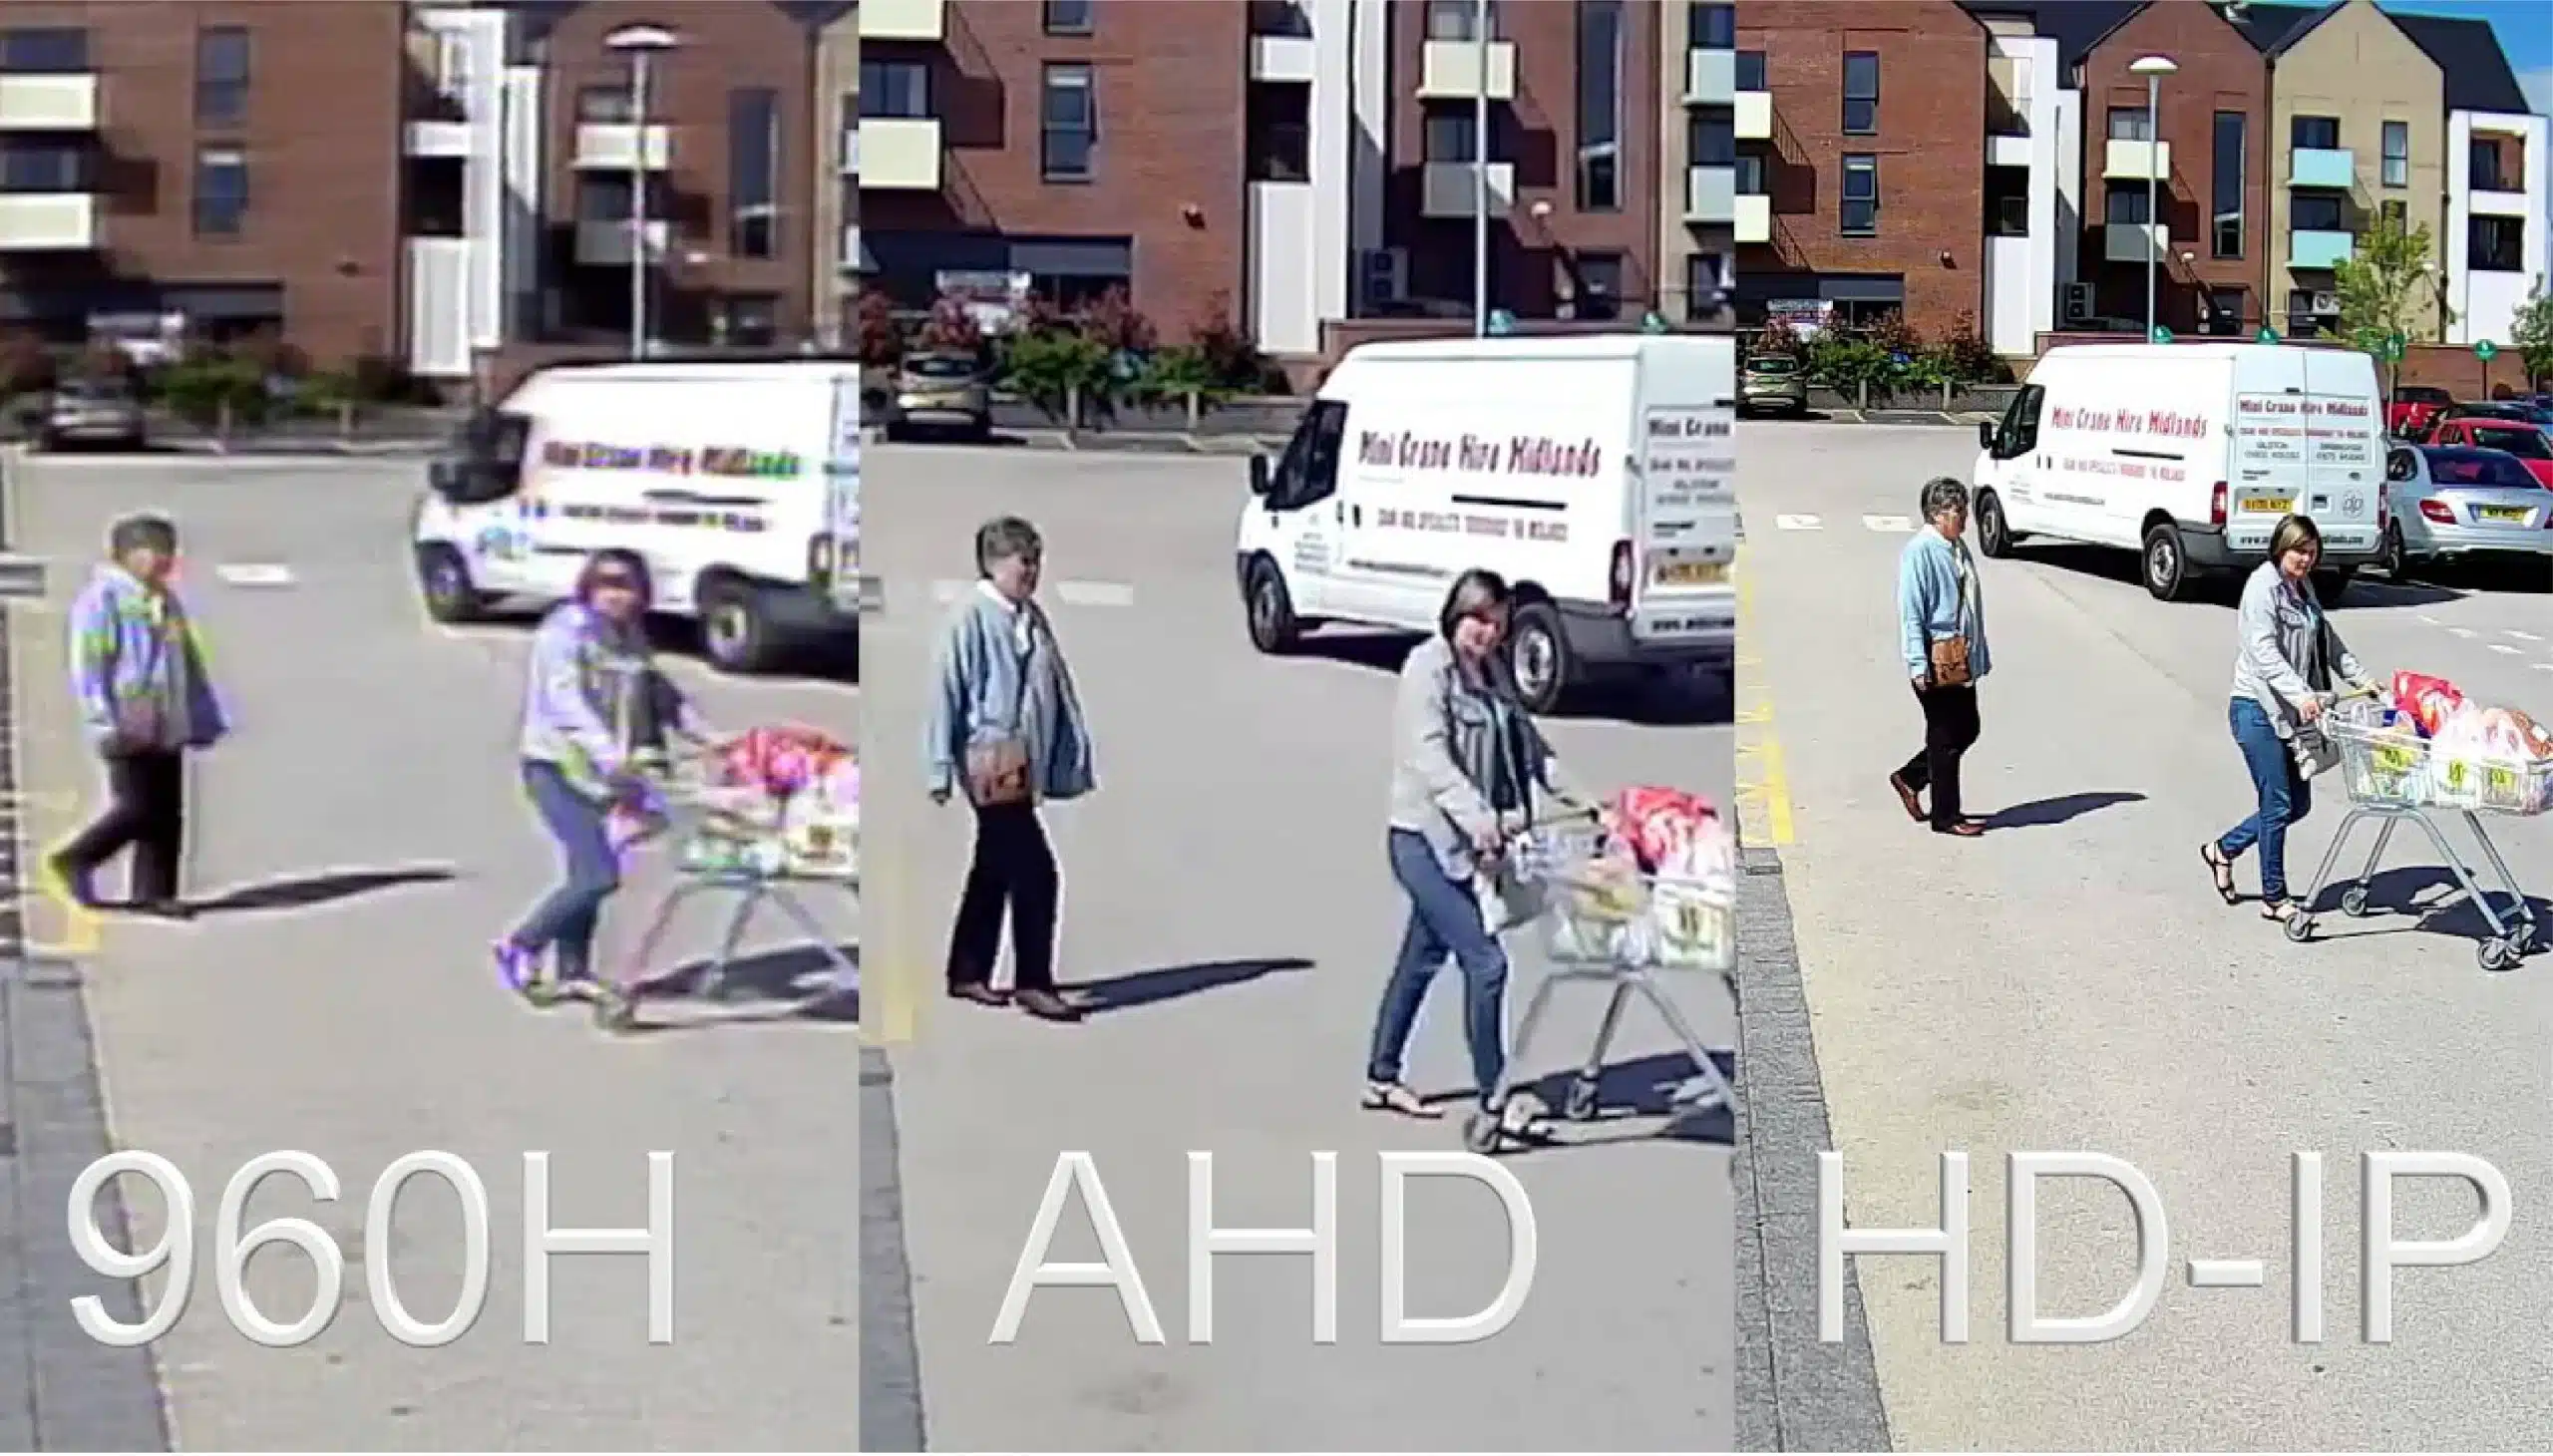 Triptych showing image clarity from three difference video surveillance levels